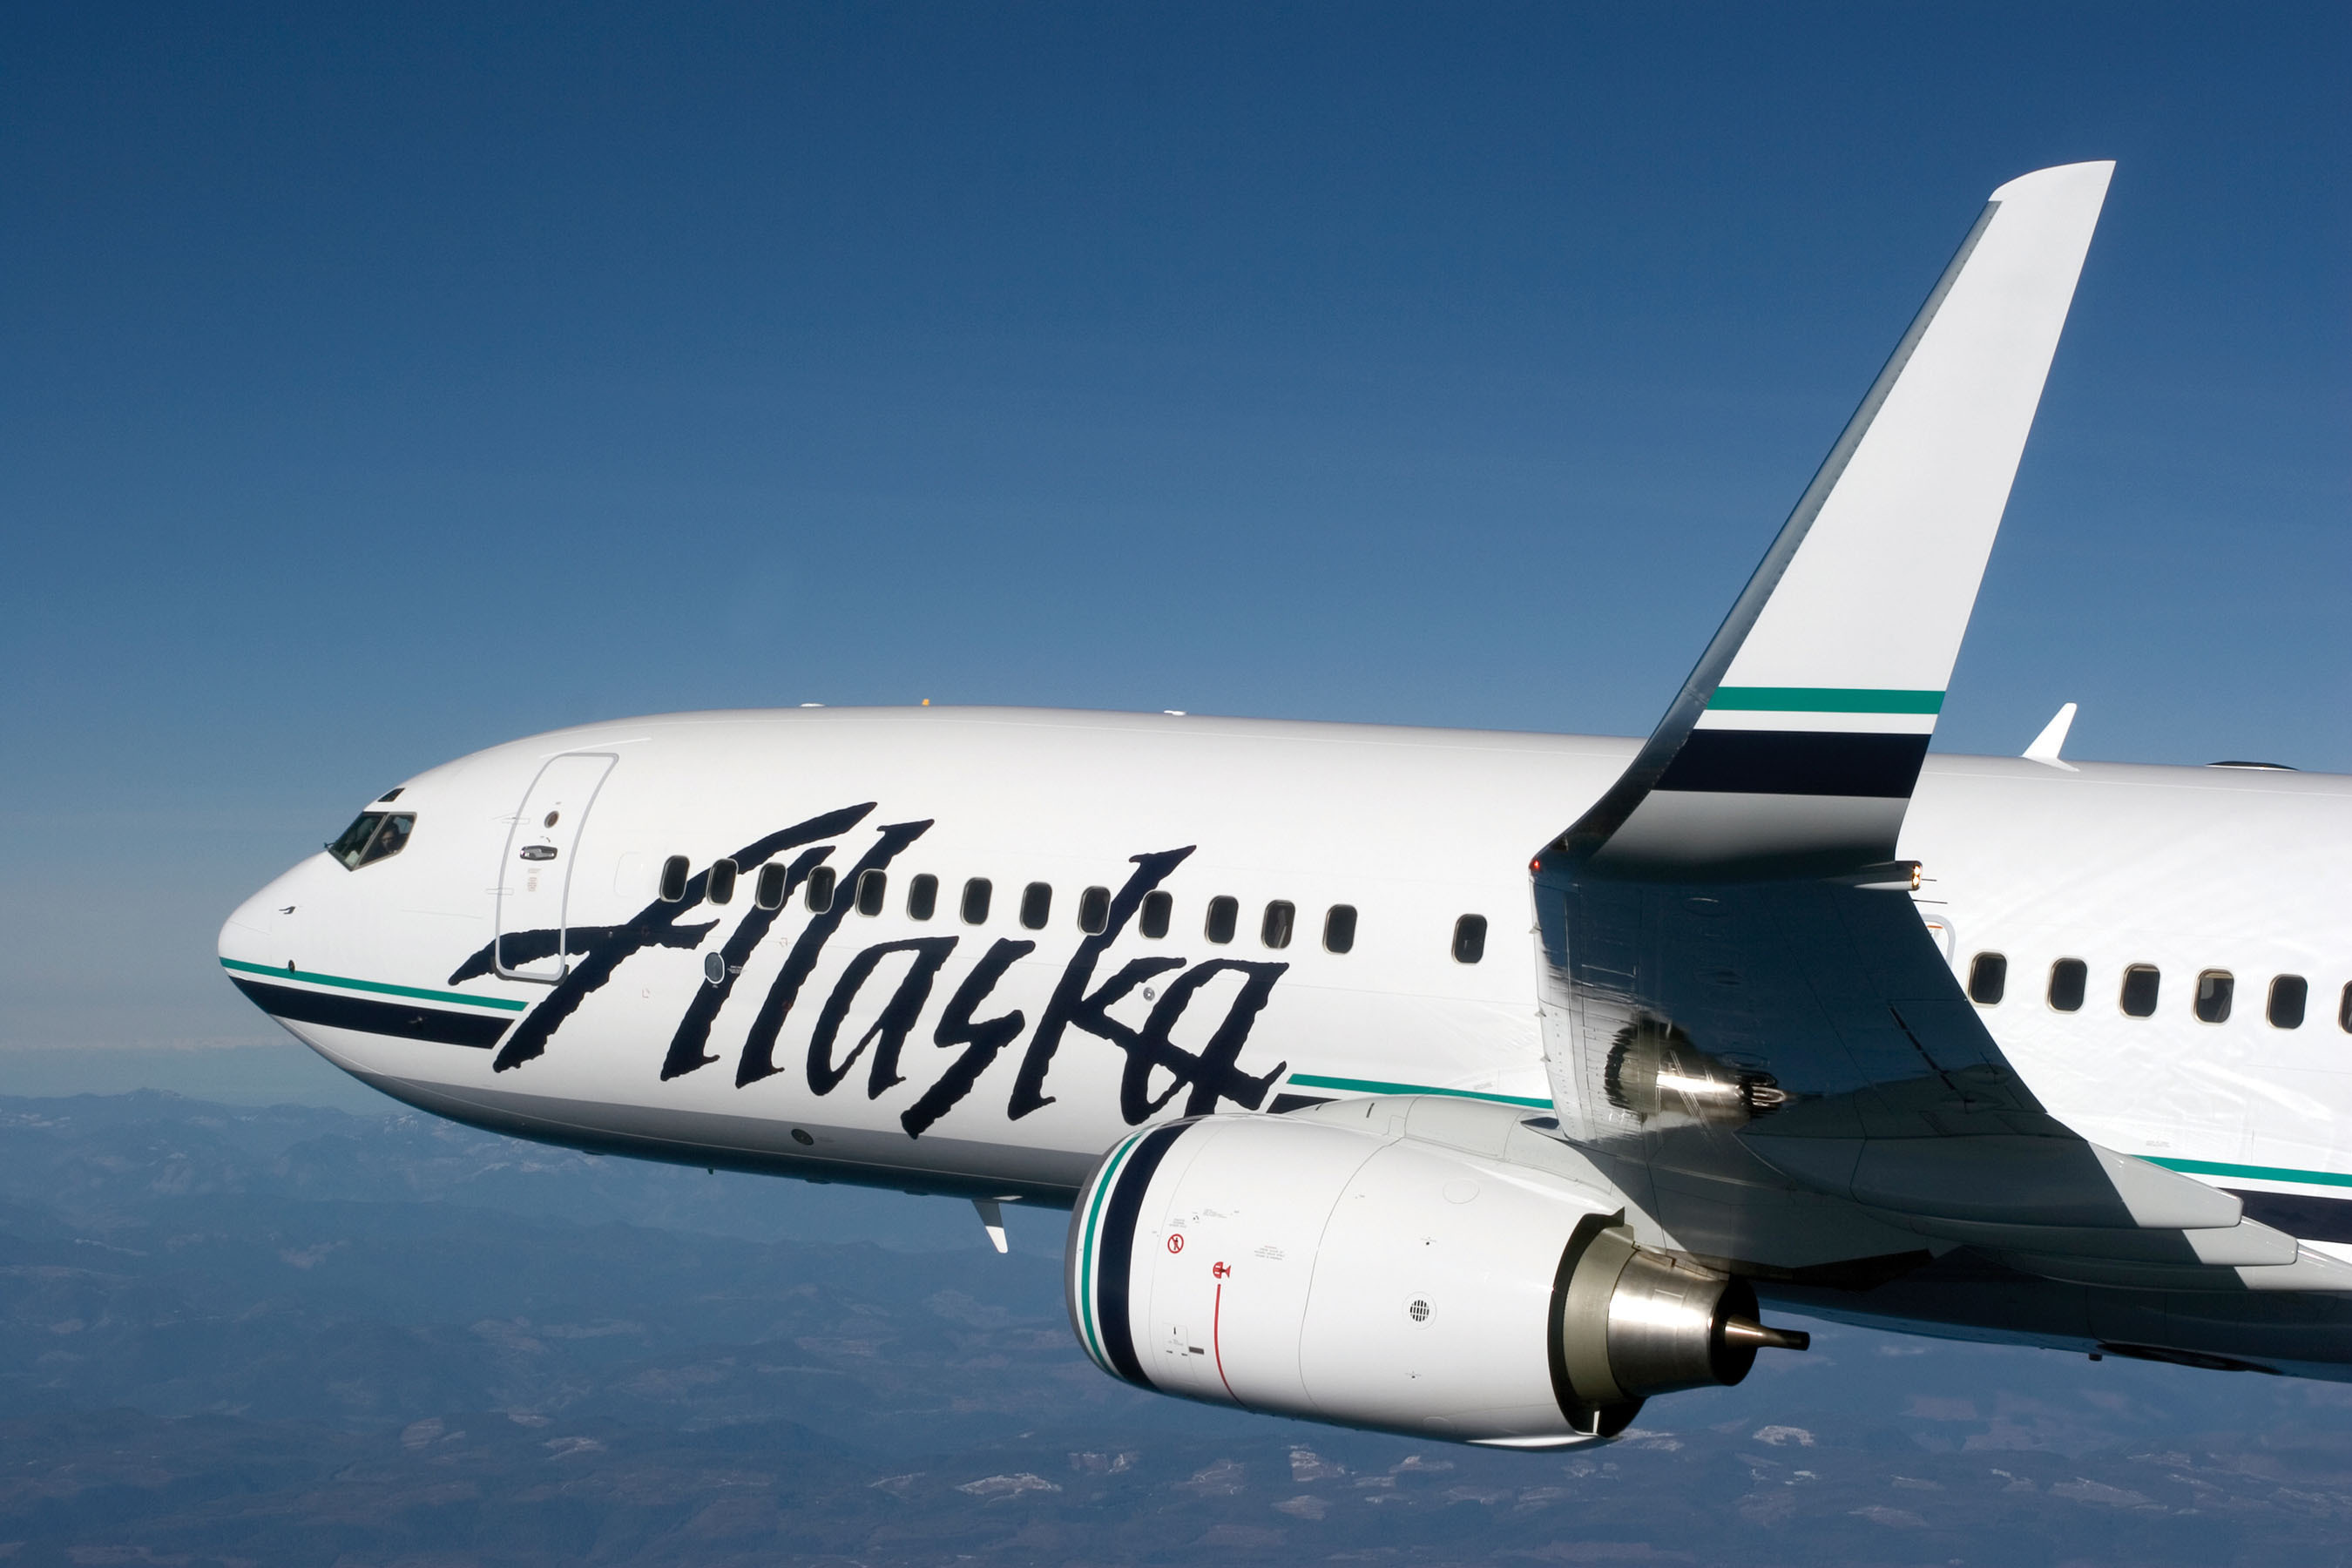 The new Salt Lake City routes will be operated with Alaska Airlines Boeing 737 and SkyWest Airlines' CRJ-700 regional jets.